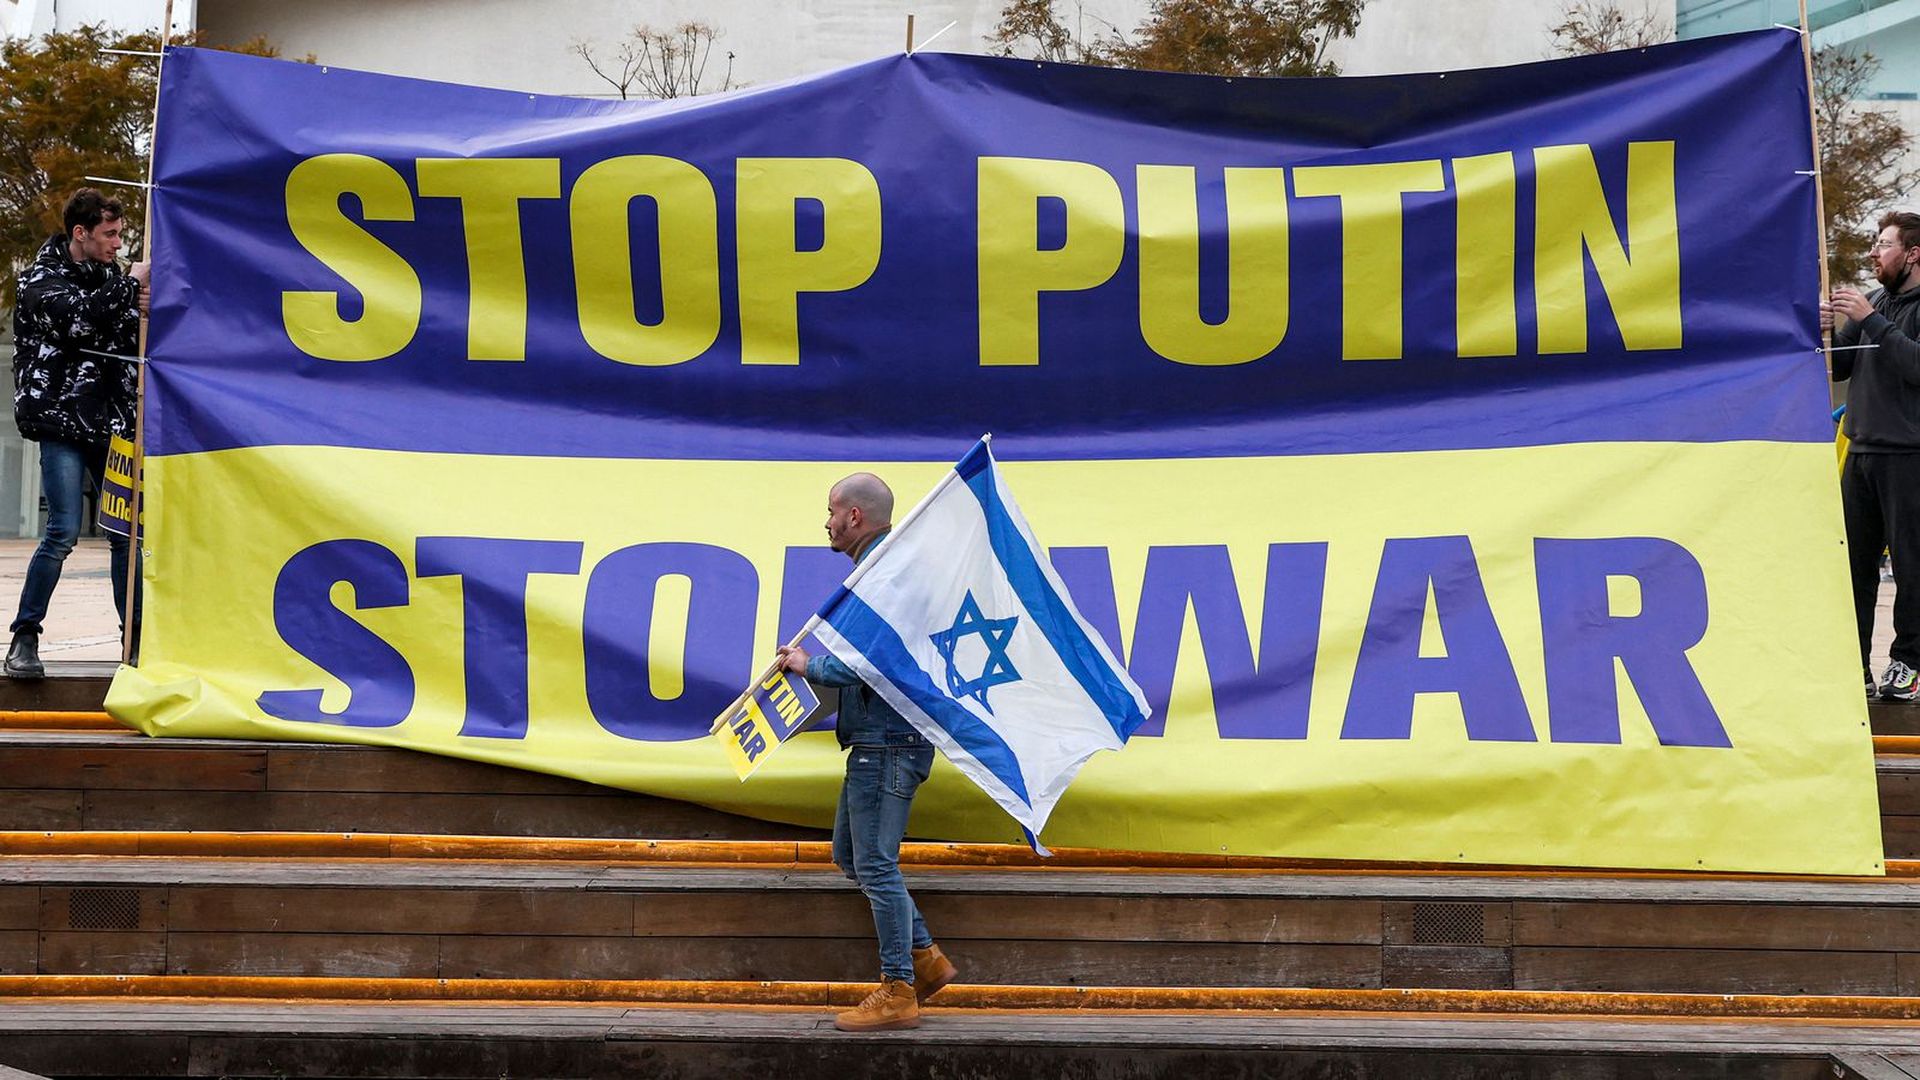 A demonstrator holds an Israeli flag during a protest against Russia's invasion of Ukraine in Tel Aviv on March 20. Photo: Jack Guez/AFP via Getty Images